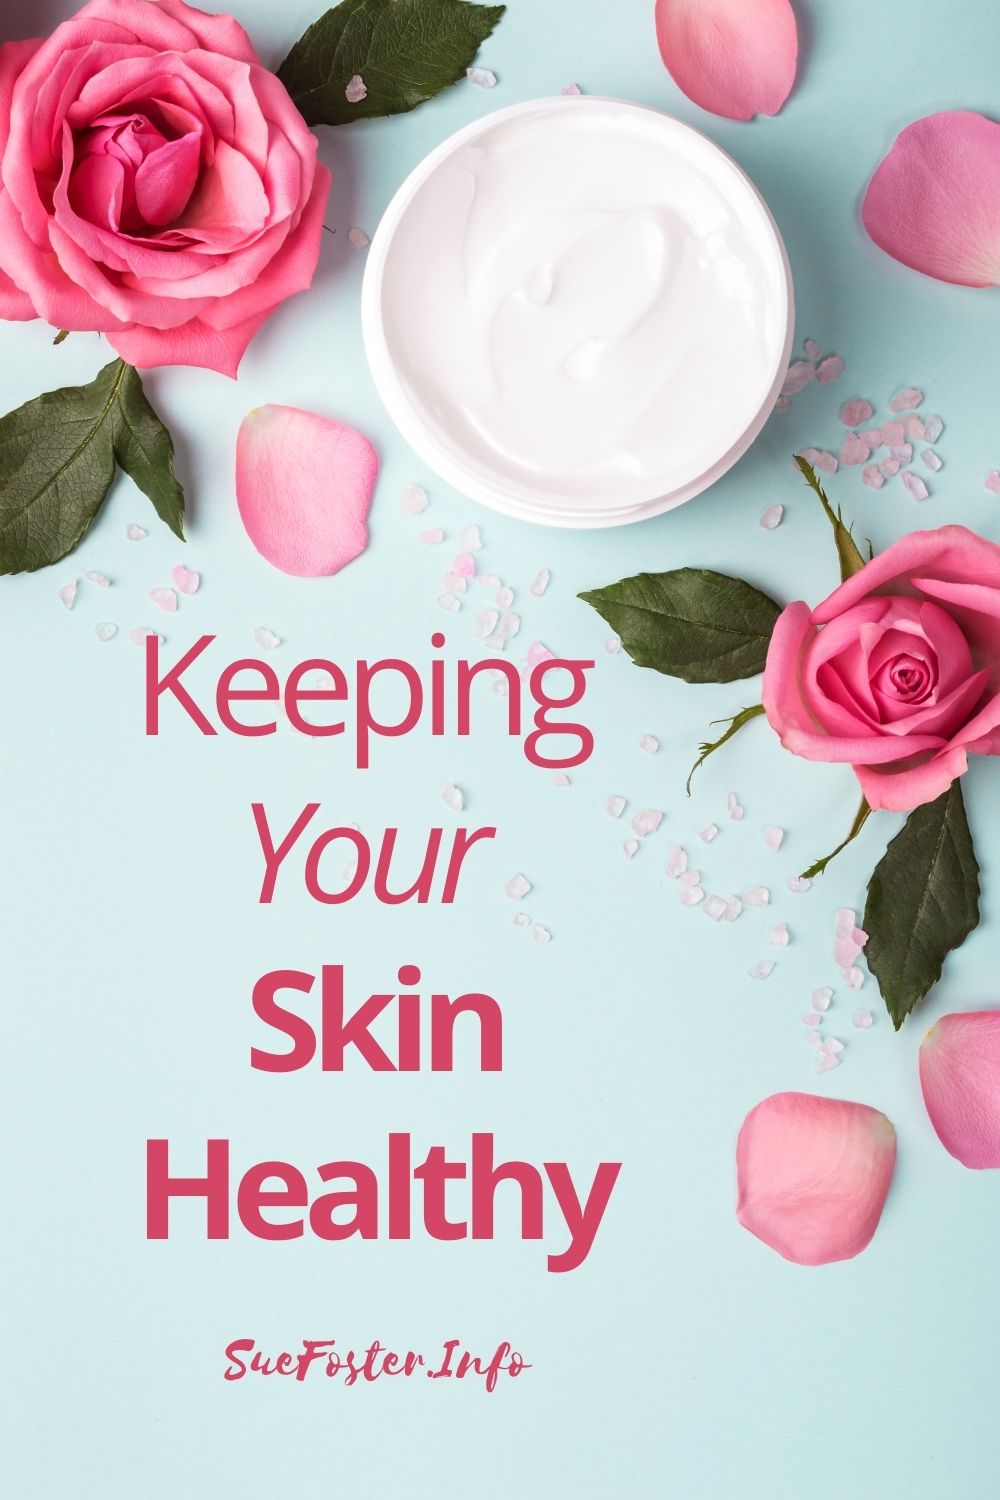 Follow these tips on keeping your skin healthy.